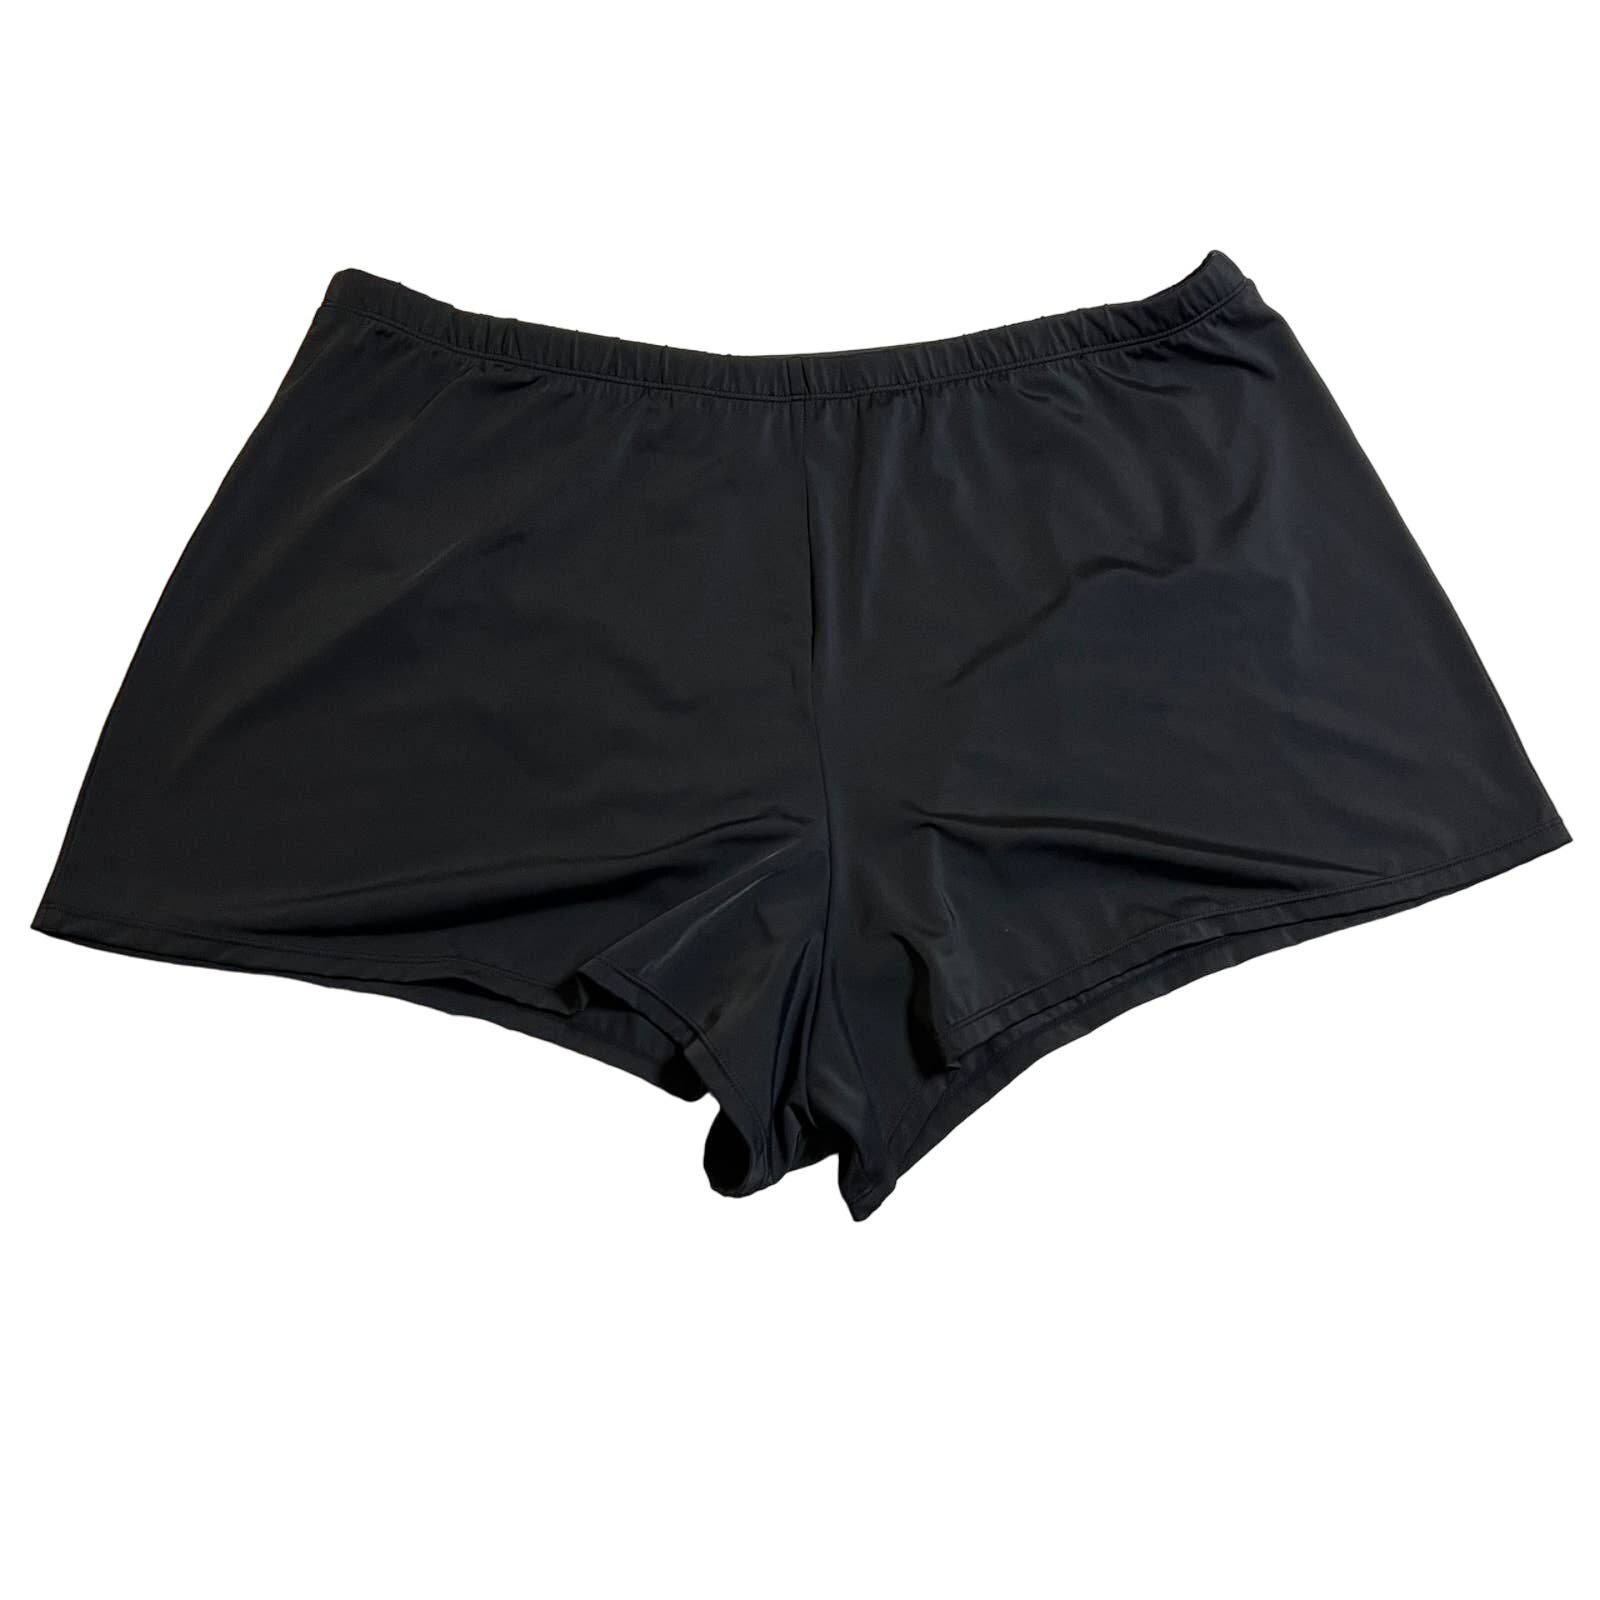 Wholesale price Avenue High Rise Swim Bottoms Shorts Size 18 Vacation Casual Curvy GYdDN608H on sale